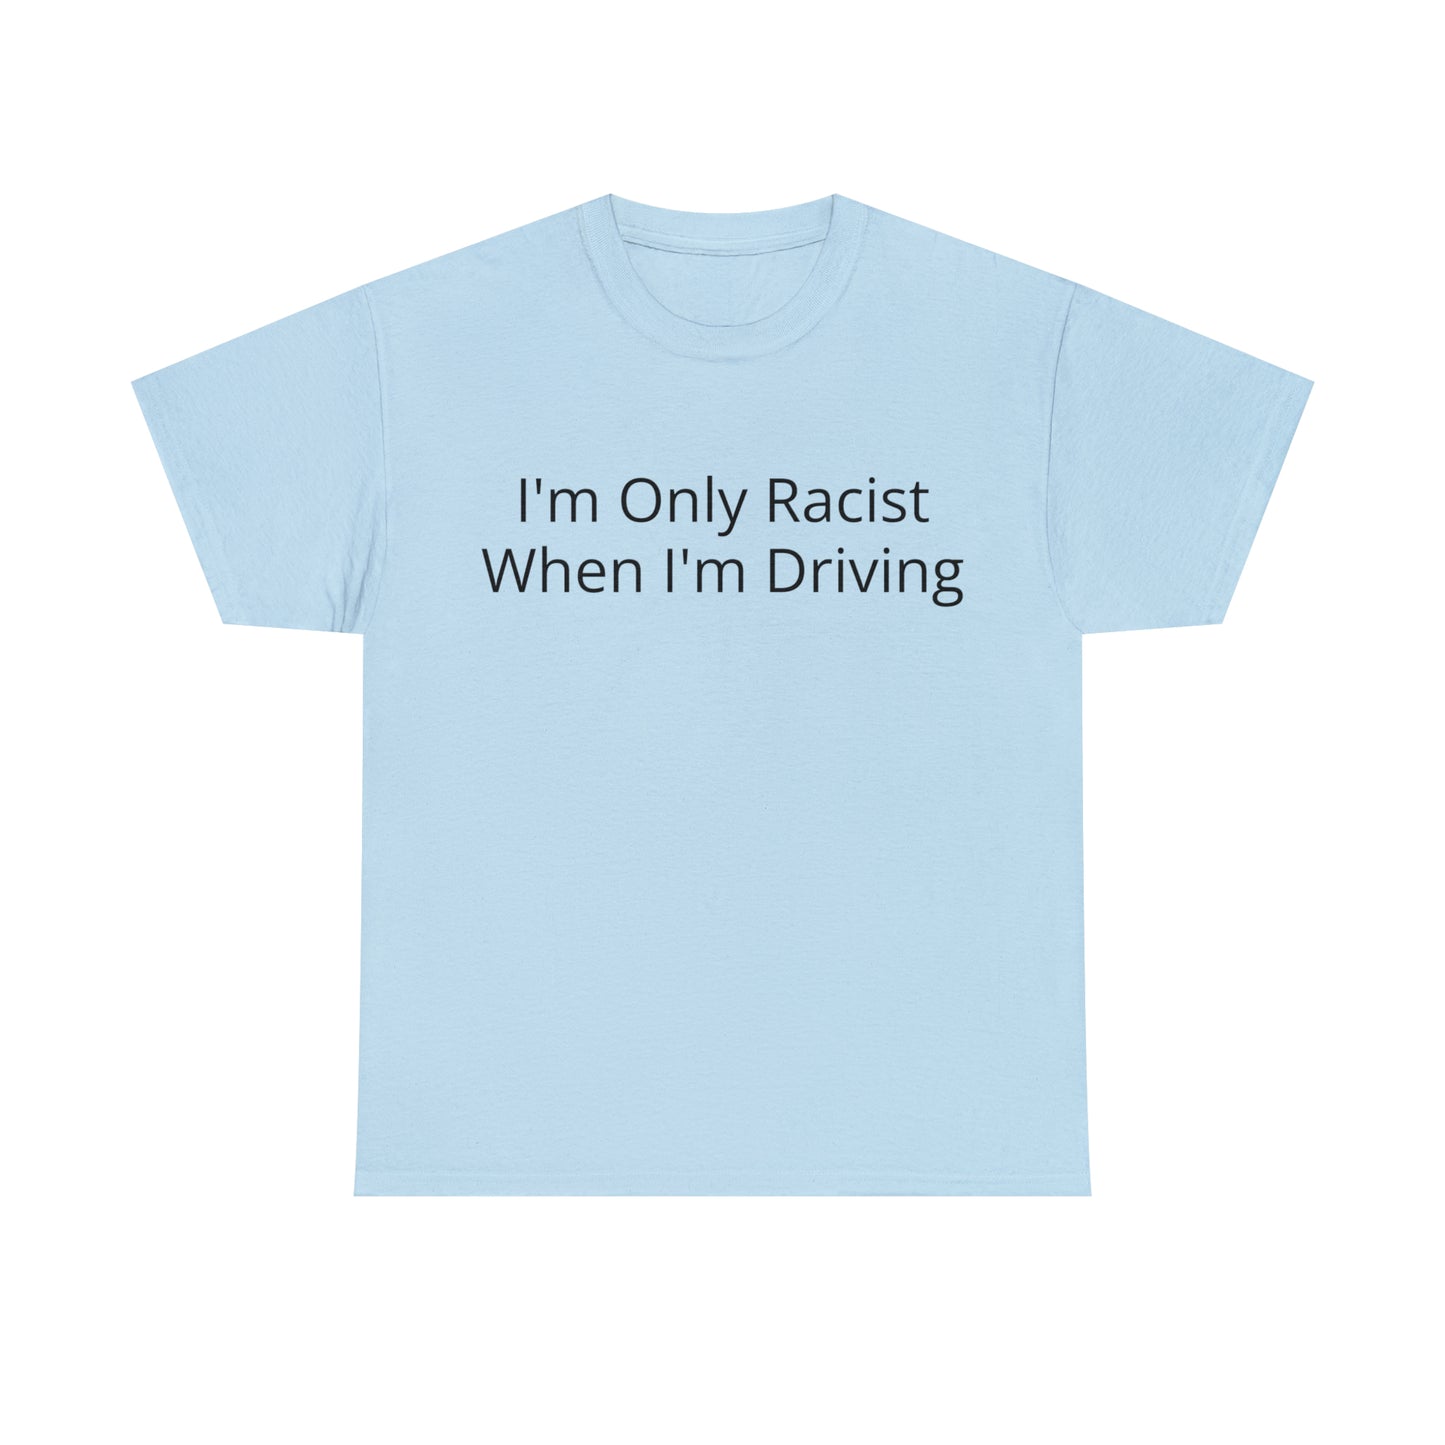 I'm Only Racist When I'm Driving